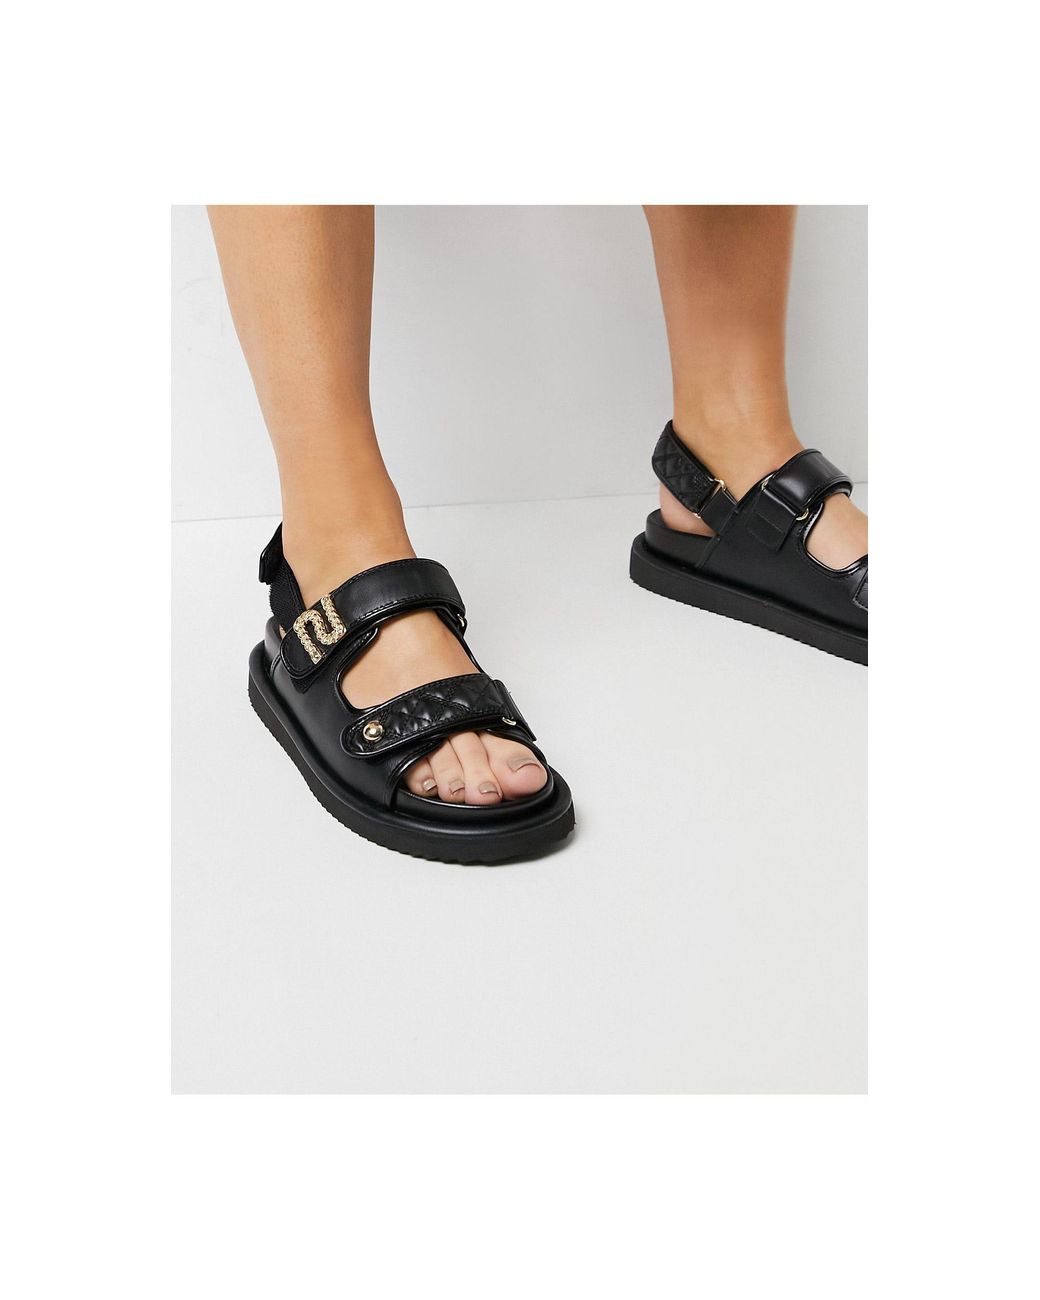 River Island Quilted Sporty Flat Sandal in Black | Lyst